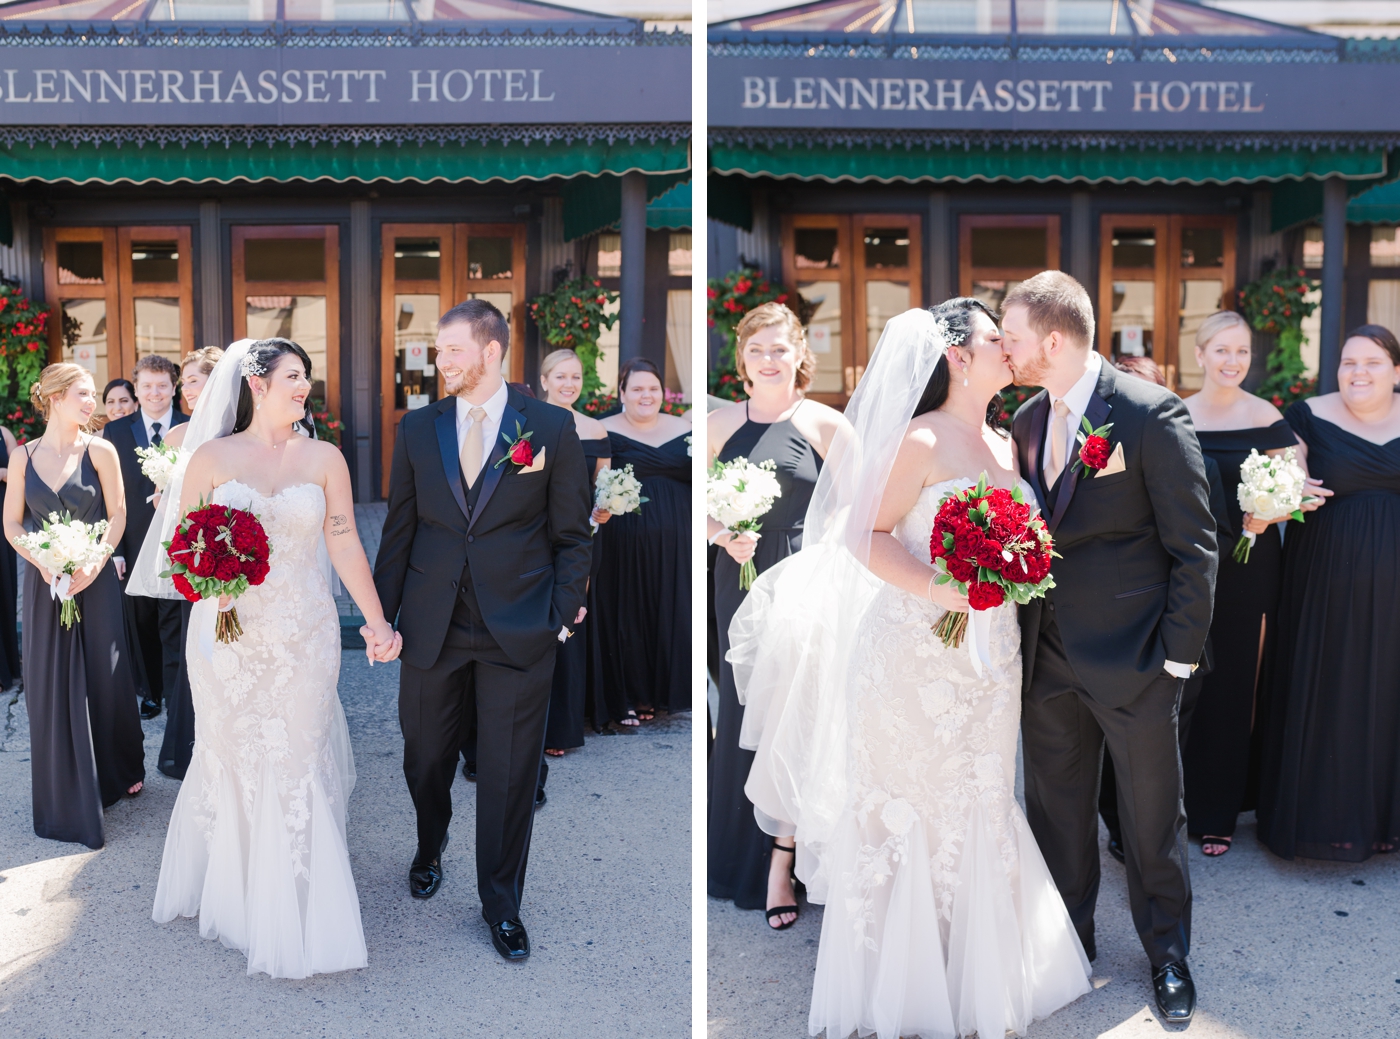 Classic black, white and red wedding at Blennerhassett Hotel 